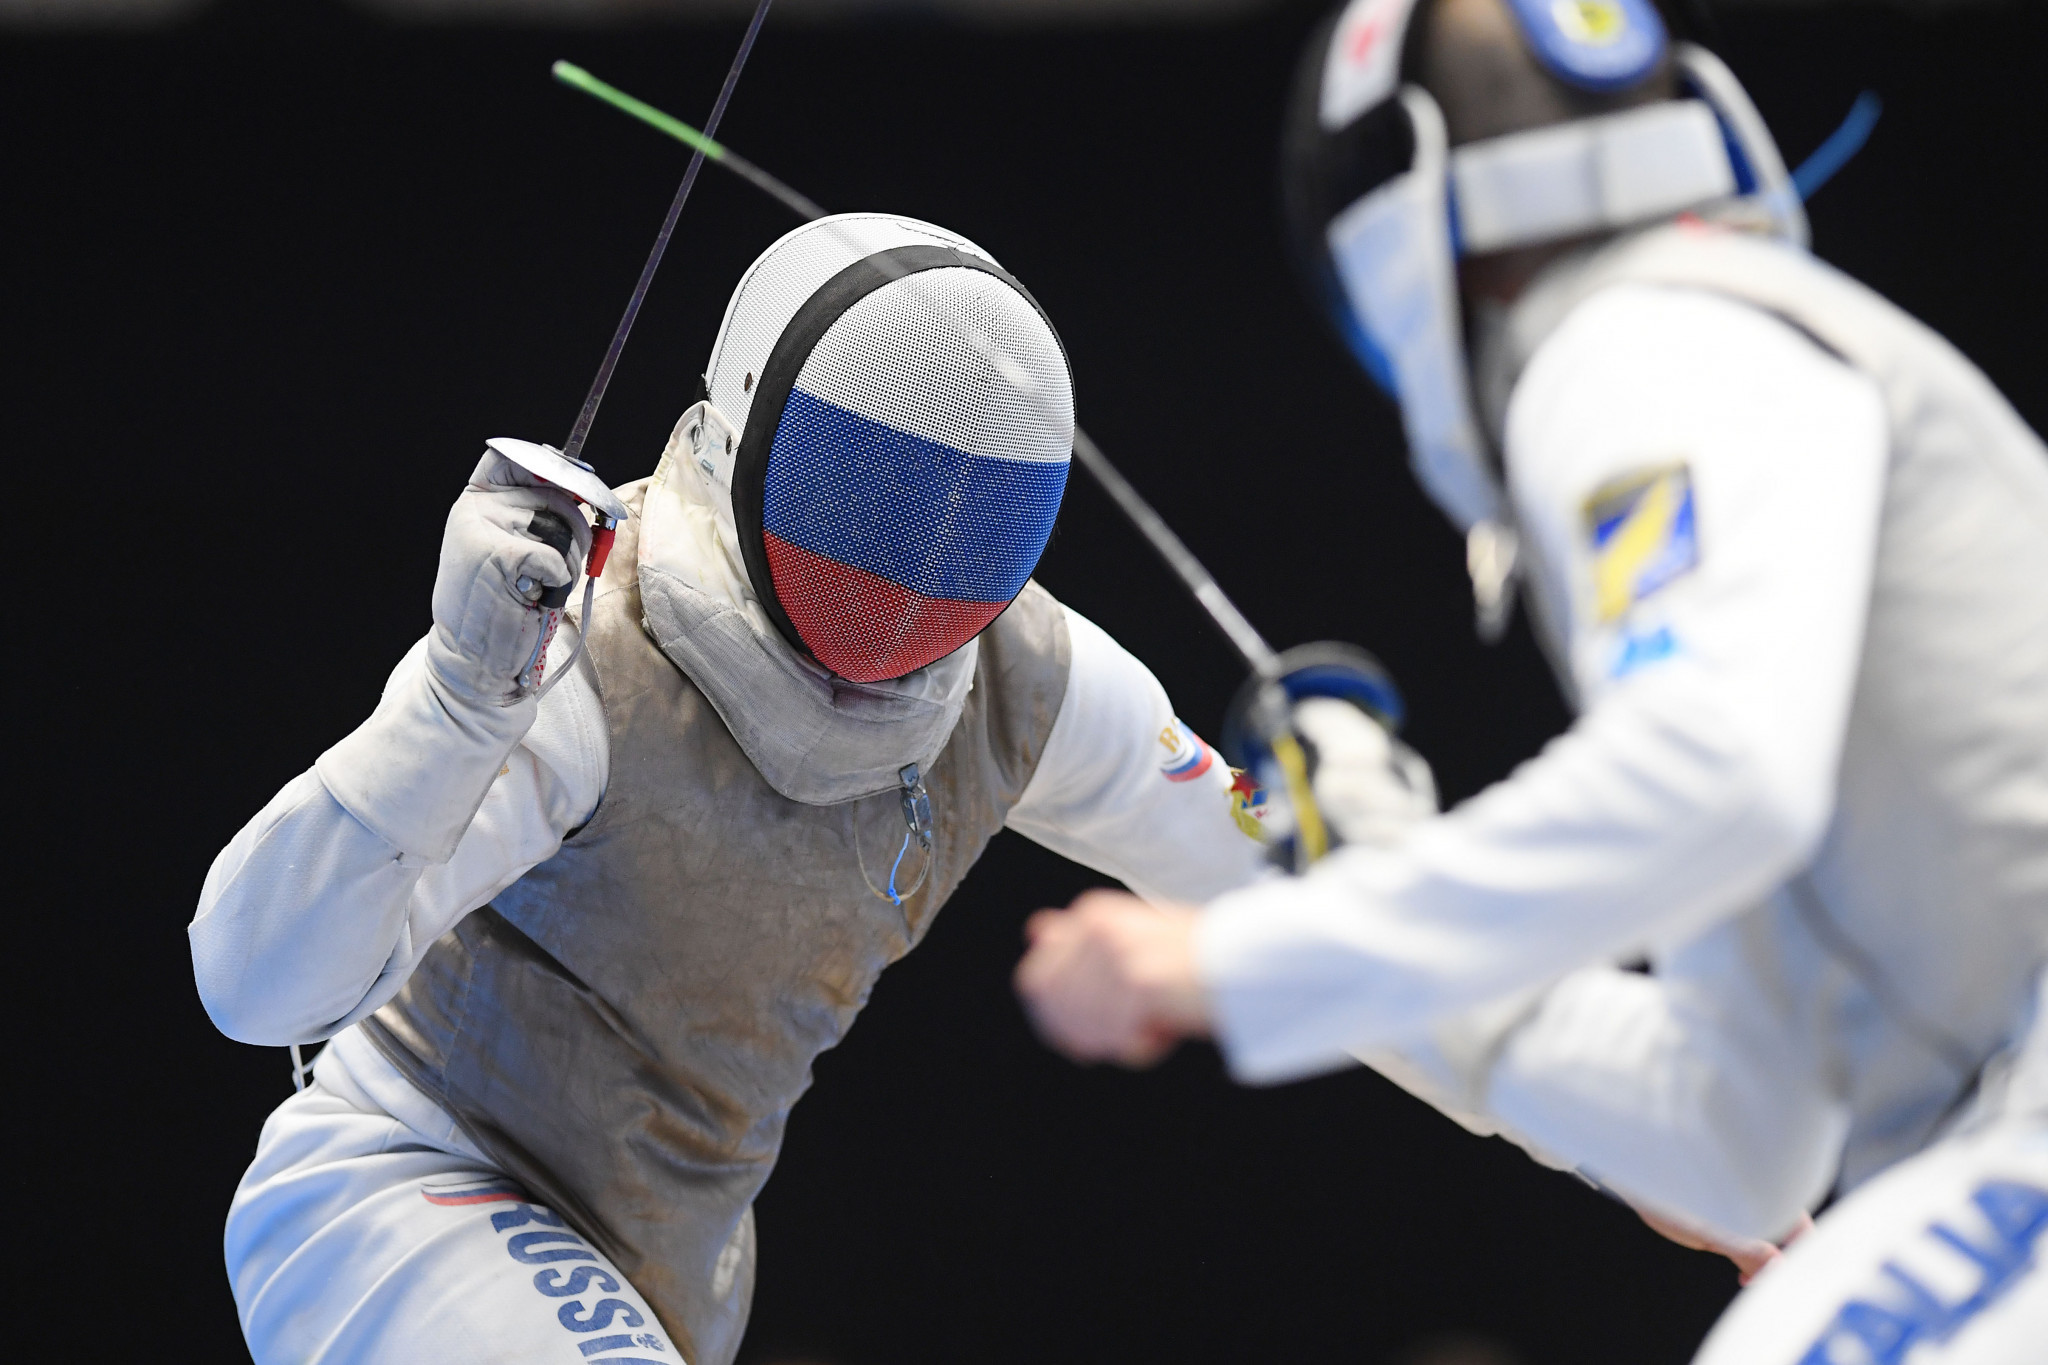 Russian and Belarusian fencers are set to return to FIE competitions ©Getty Images